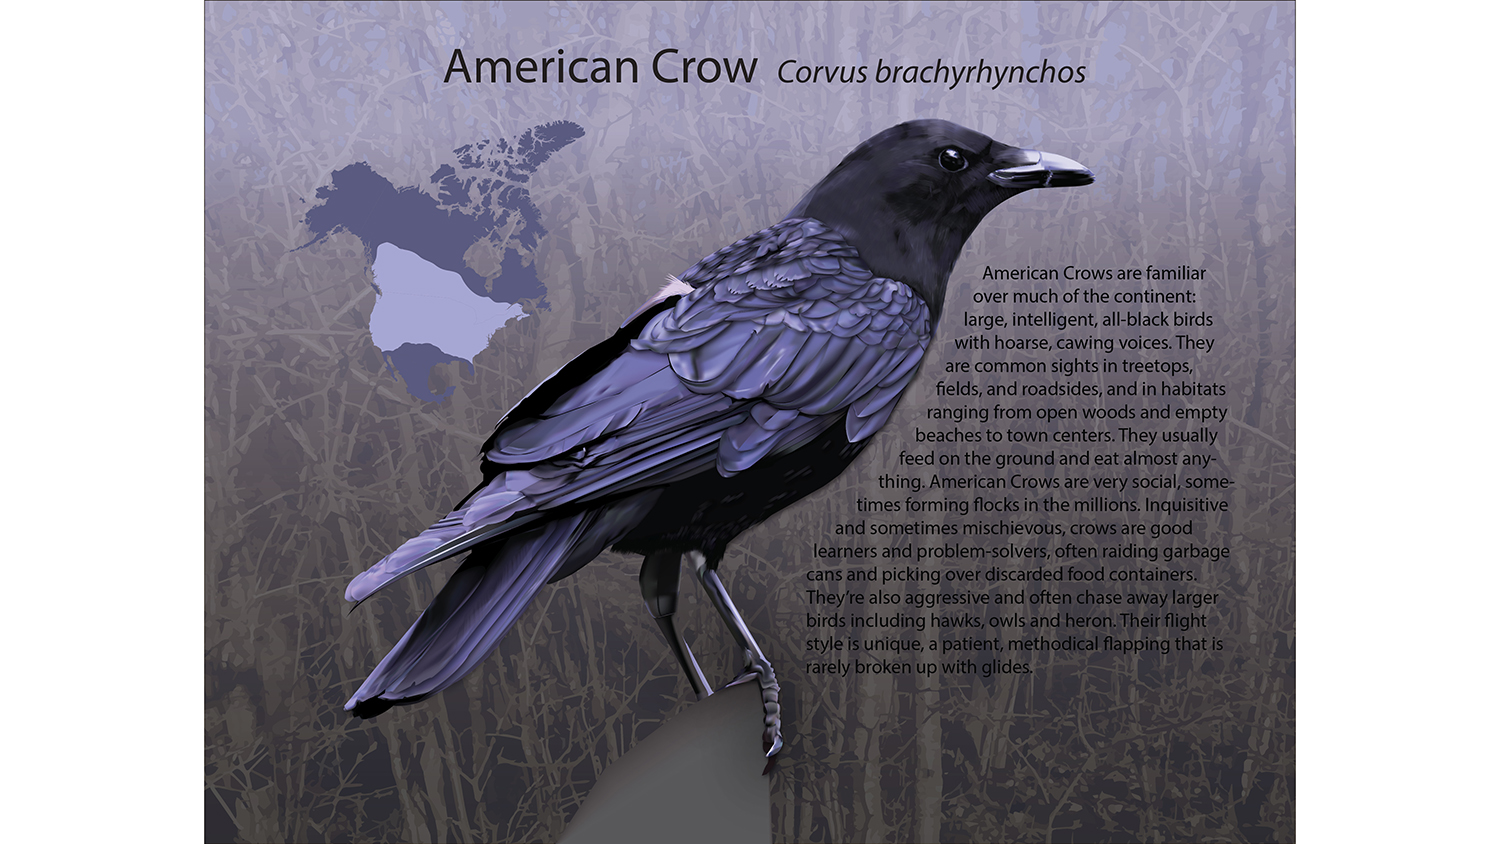 An illustration of an American crow